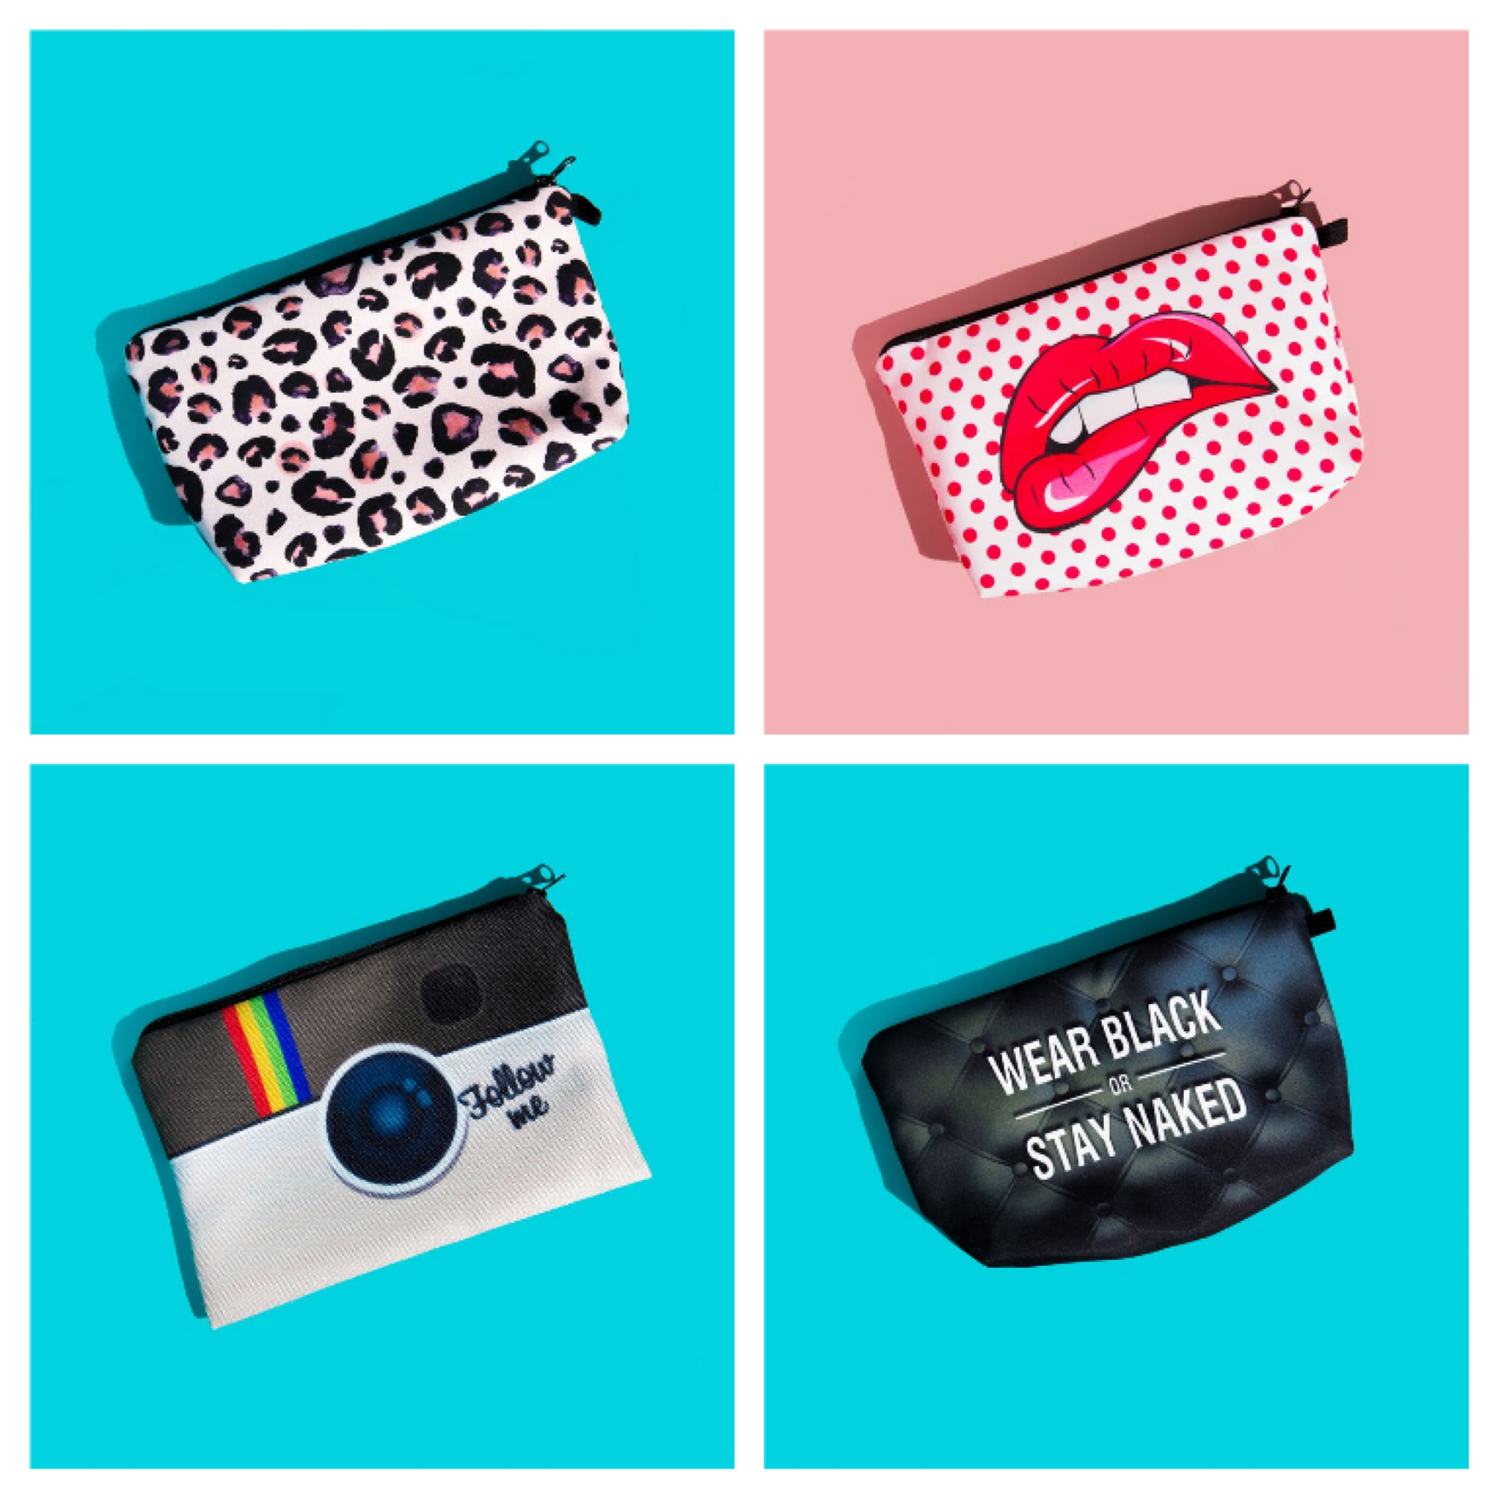 Image displays 4 different styles of pouches designed to store used or spare Period pants.  Top left is pink leopard print, top right is a camera design with the words 'follow me'.  Bottom left is white with red polka dots and a pair of red lips, bottom right is a black pouch displaying the words 'WEAR BLACK OF STAY NAKED' in white letters.